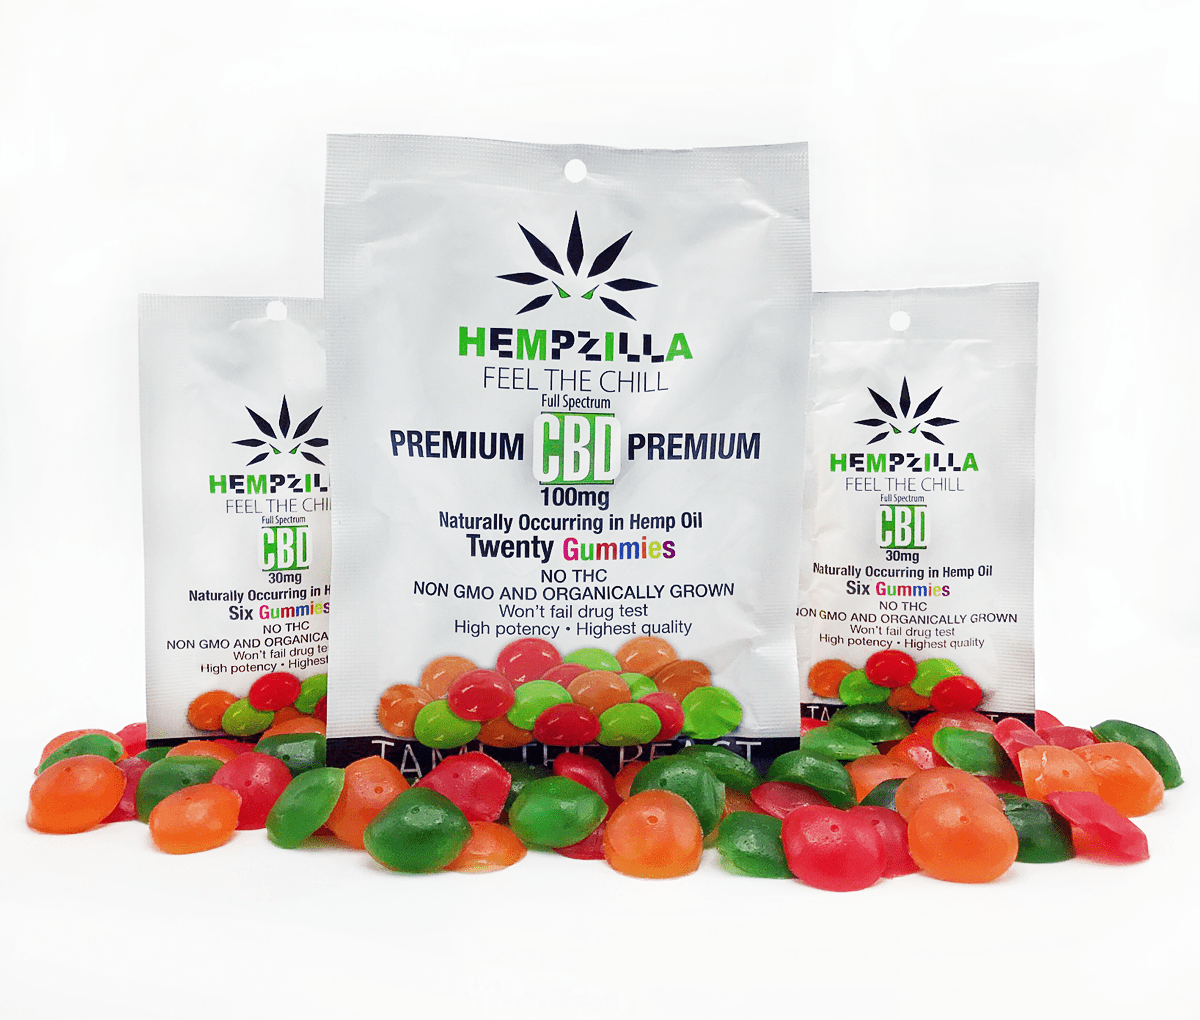 8 Hempzilla Products That Will Leave You Amazed